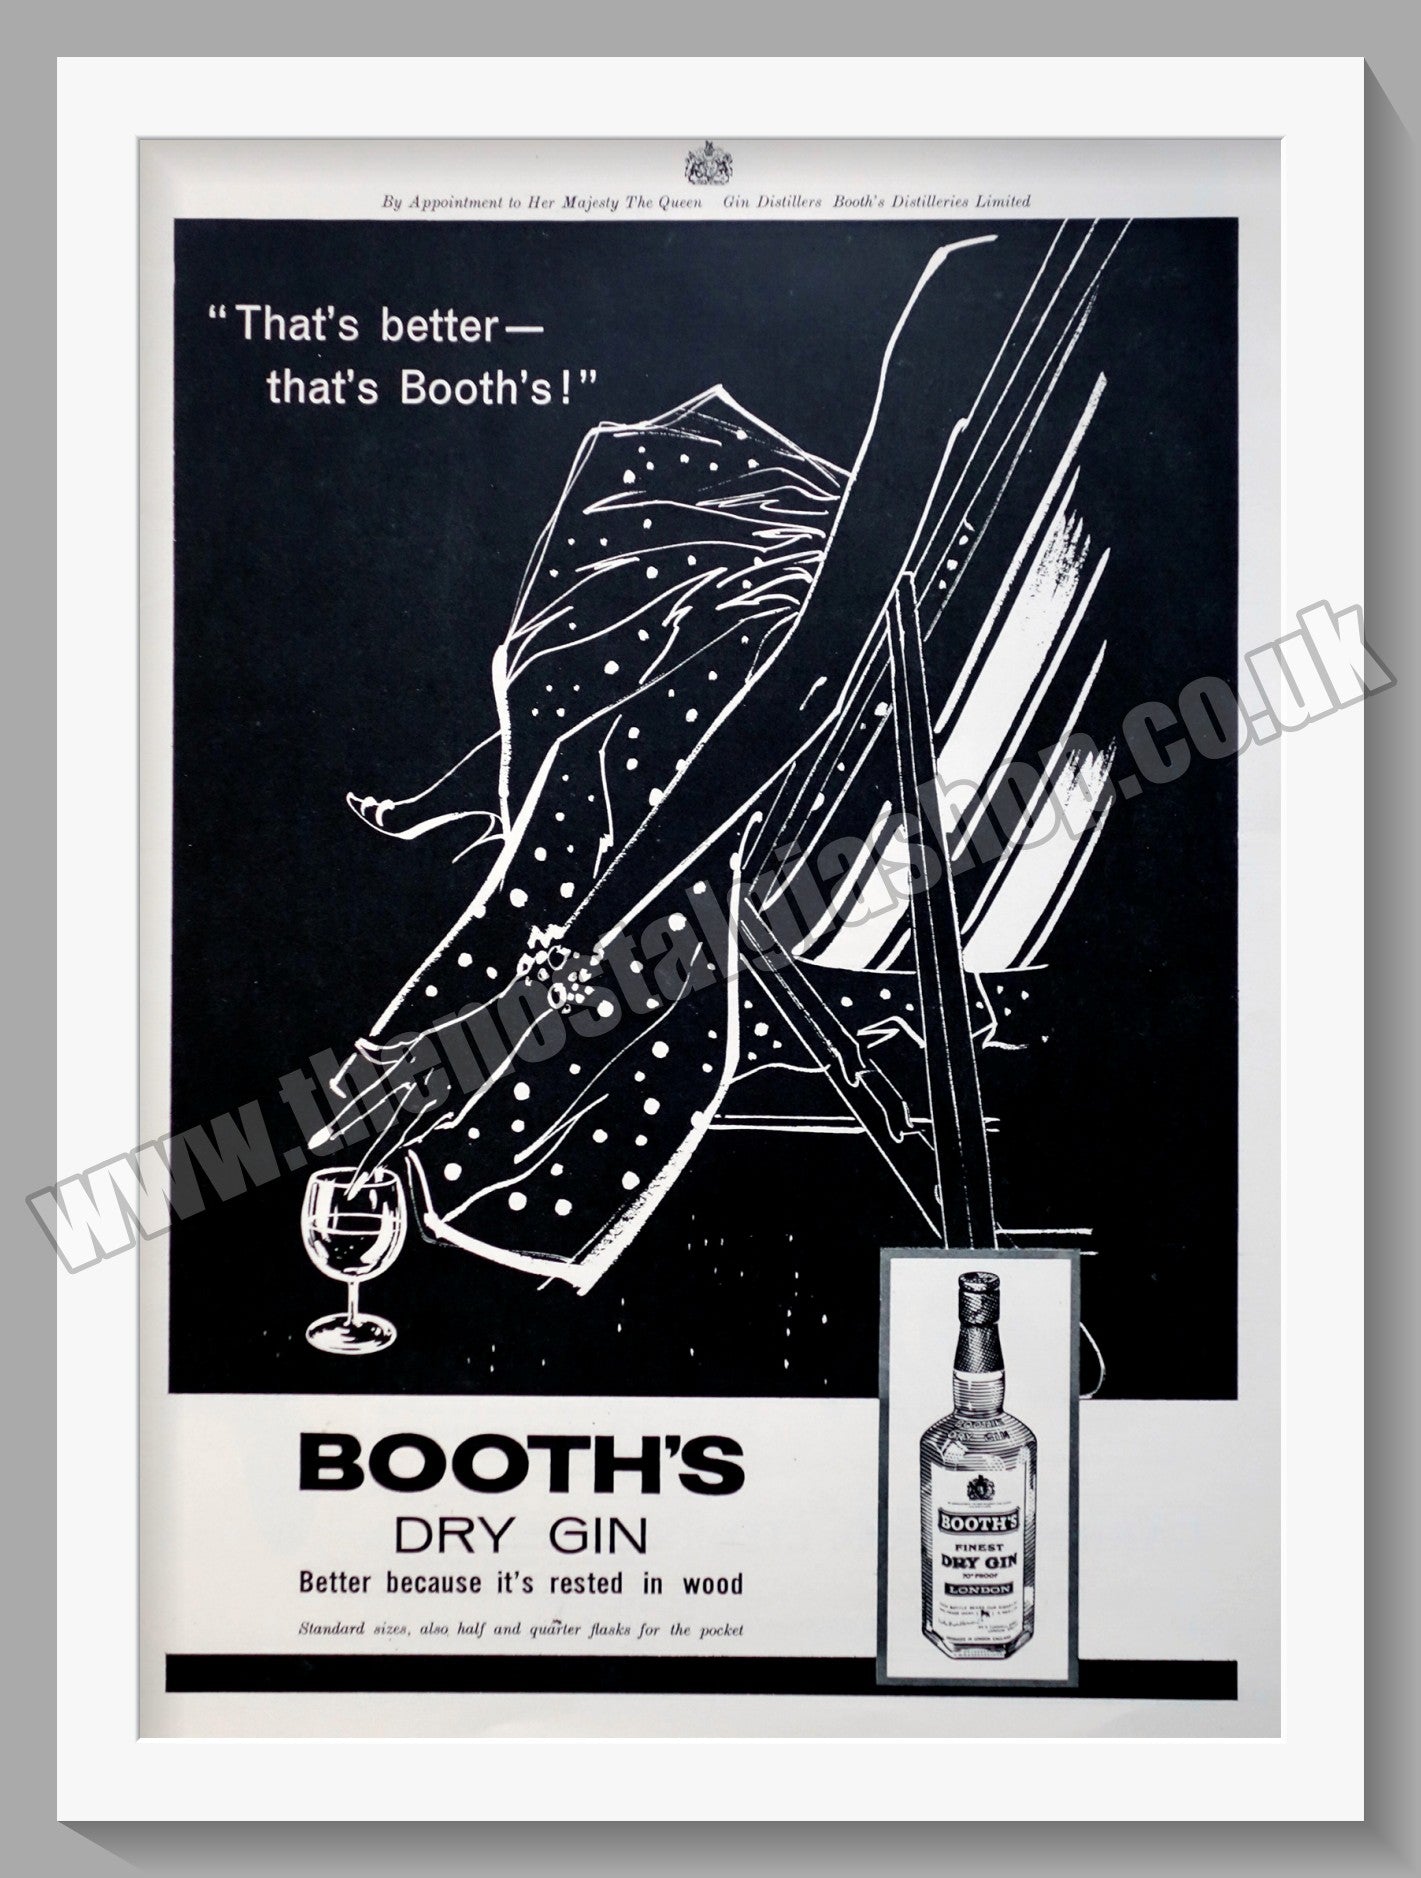 Booth's London Dry Gin. Original Advert 1960 (ref AD300299)